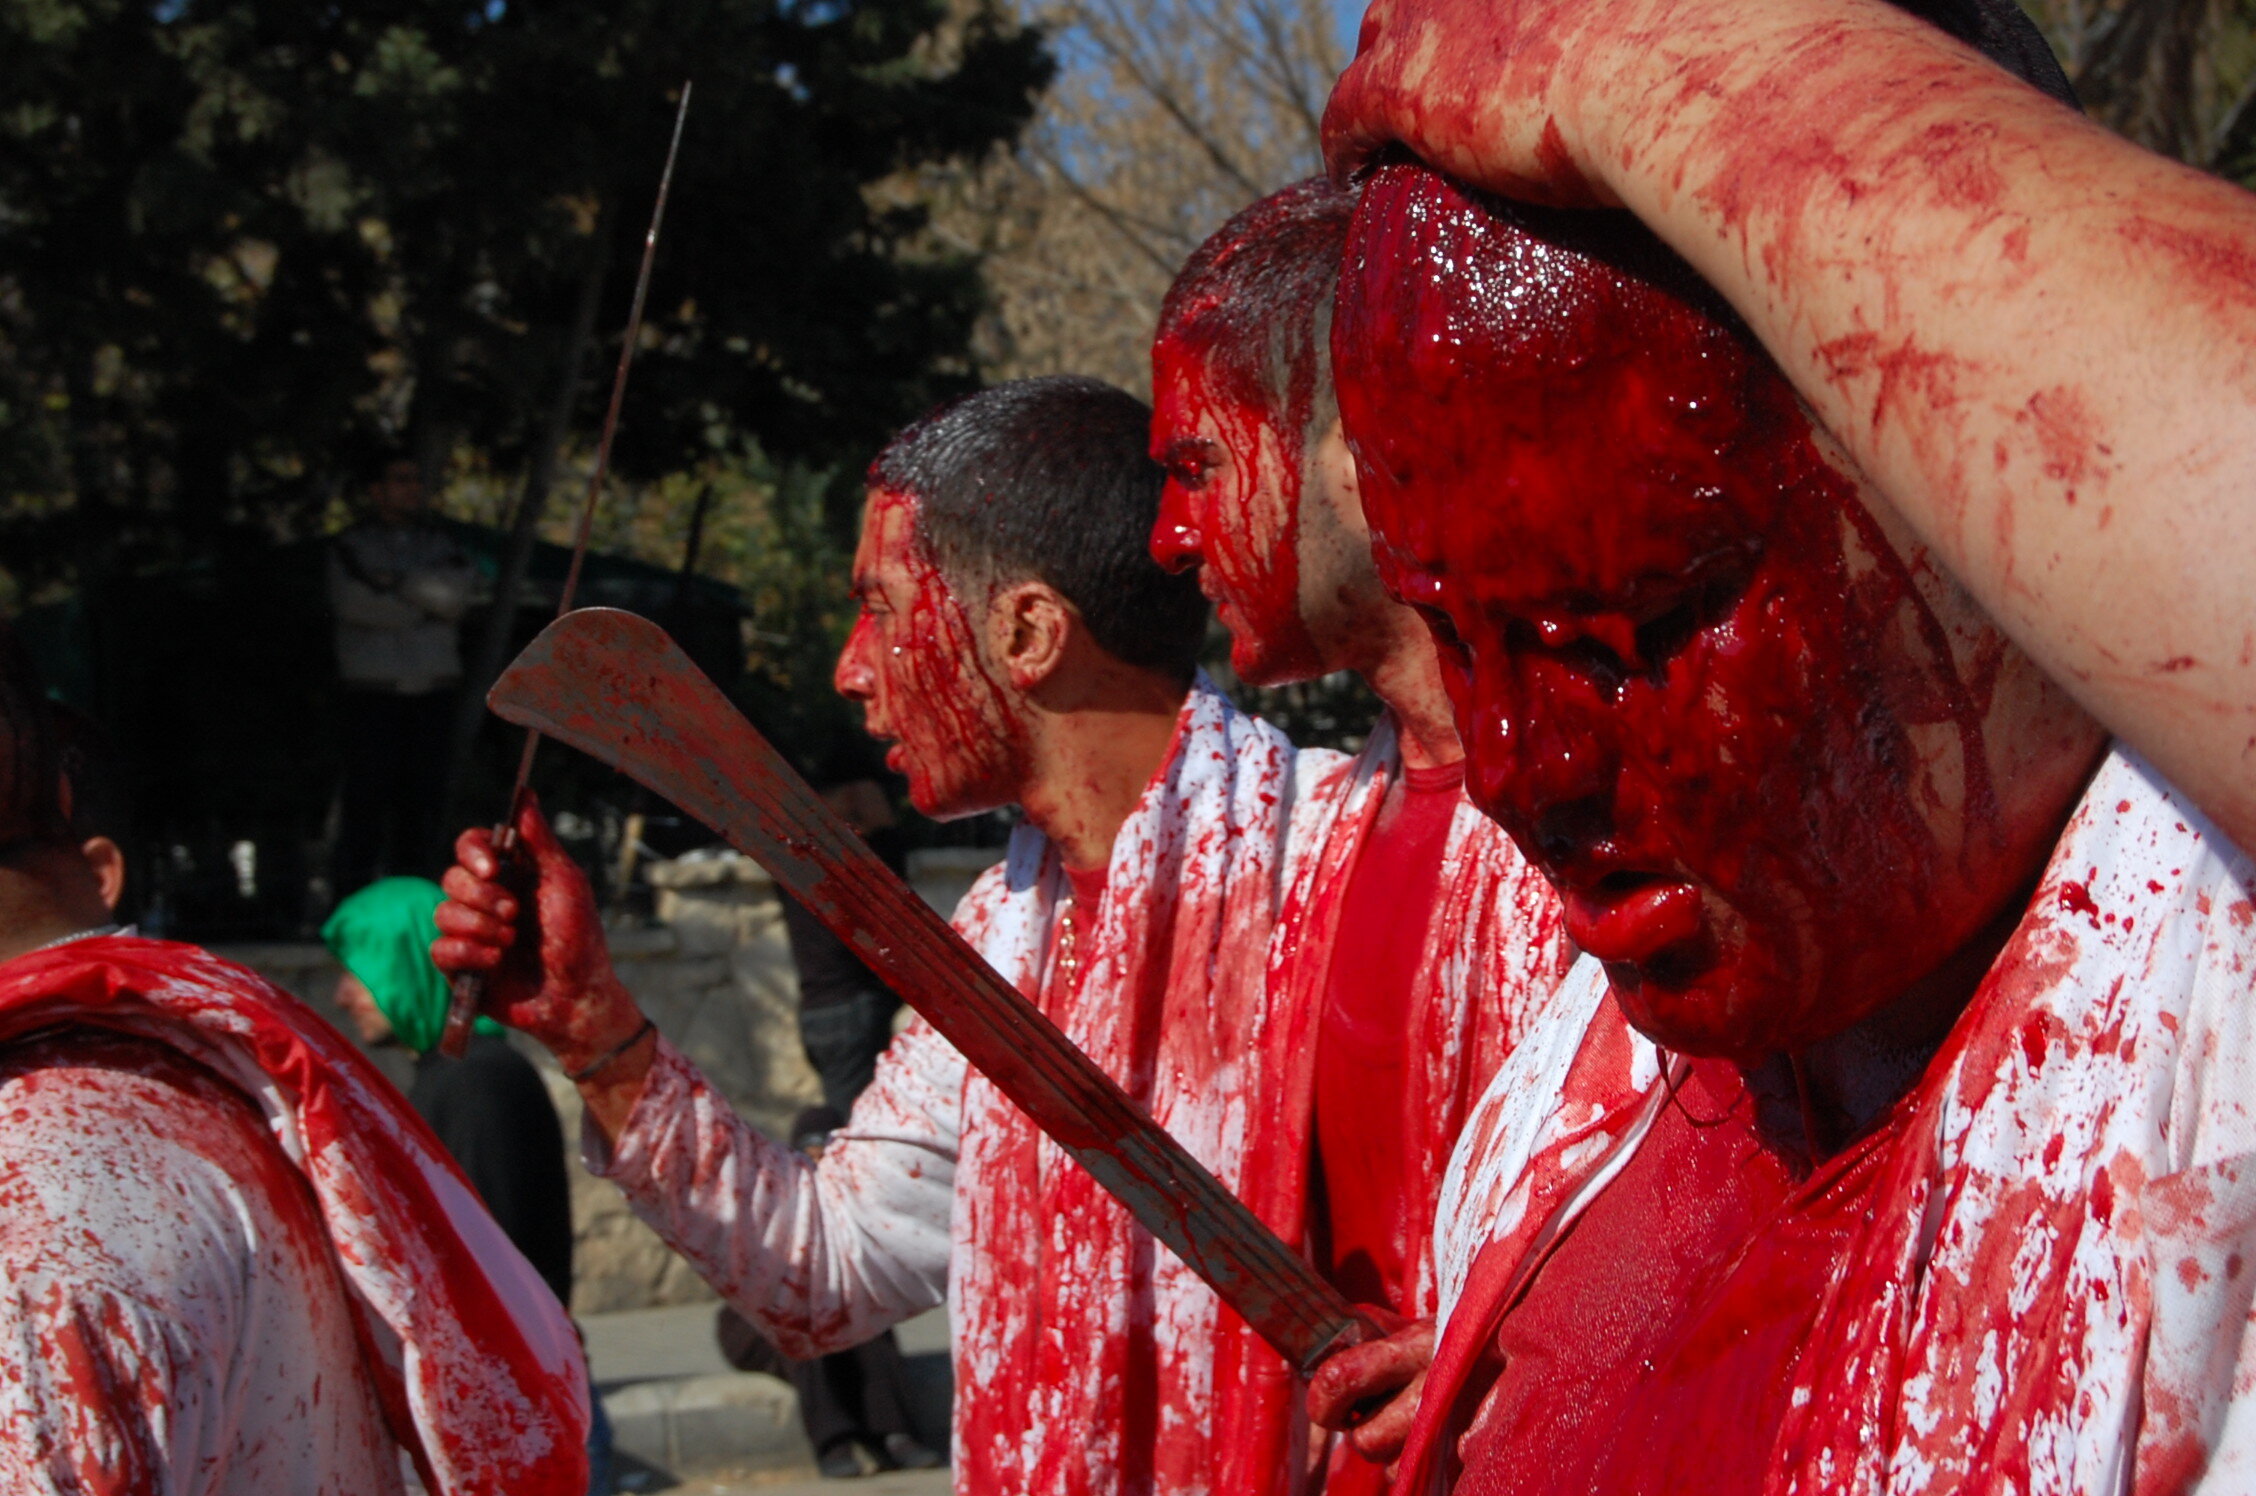  more blood flowed from their heads as they kept marching. Nabatiyeh, south Lebanon, 2008  